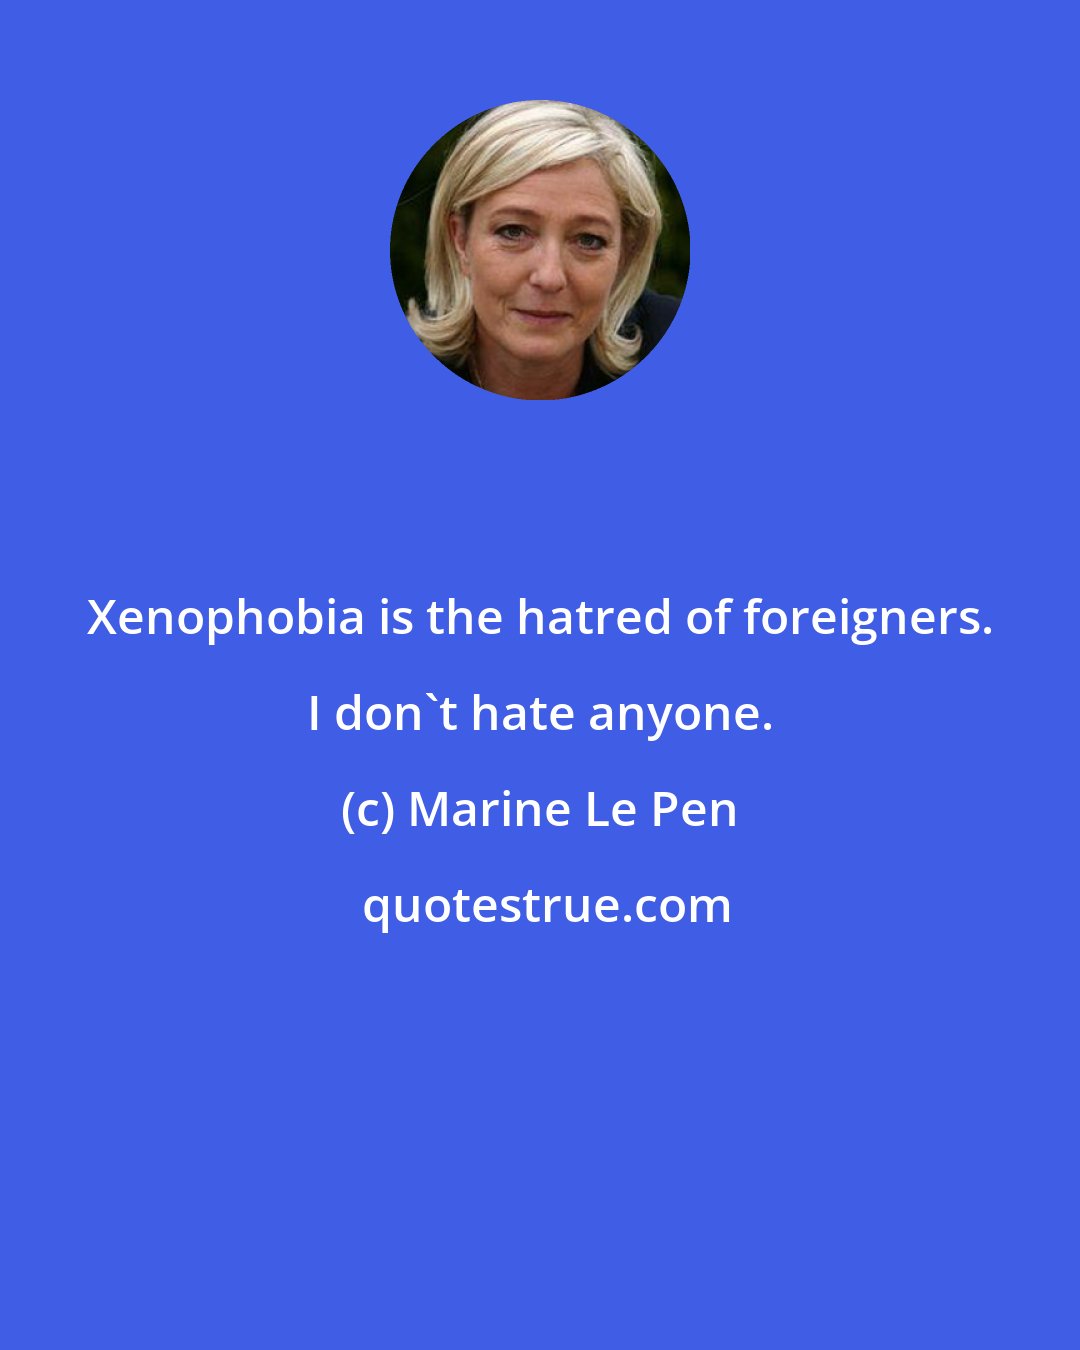 Marine Le Pen: Xenophobia is the hatred of foreigners. I don't hate anyone.